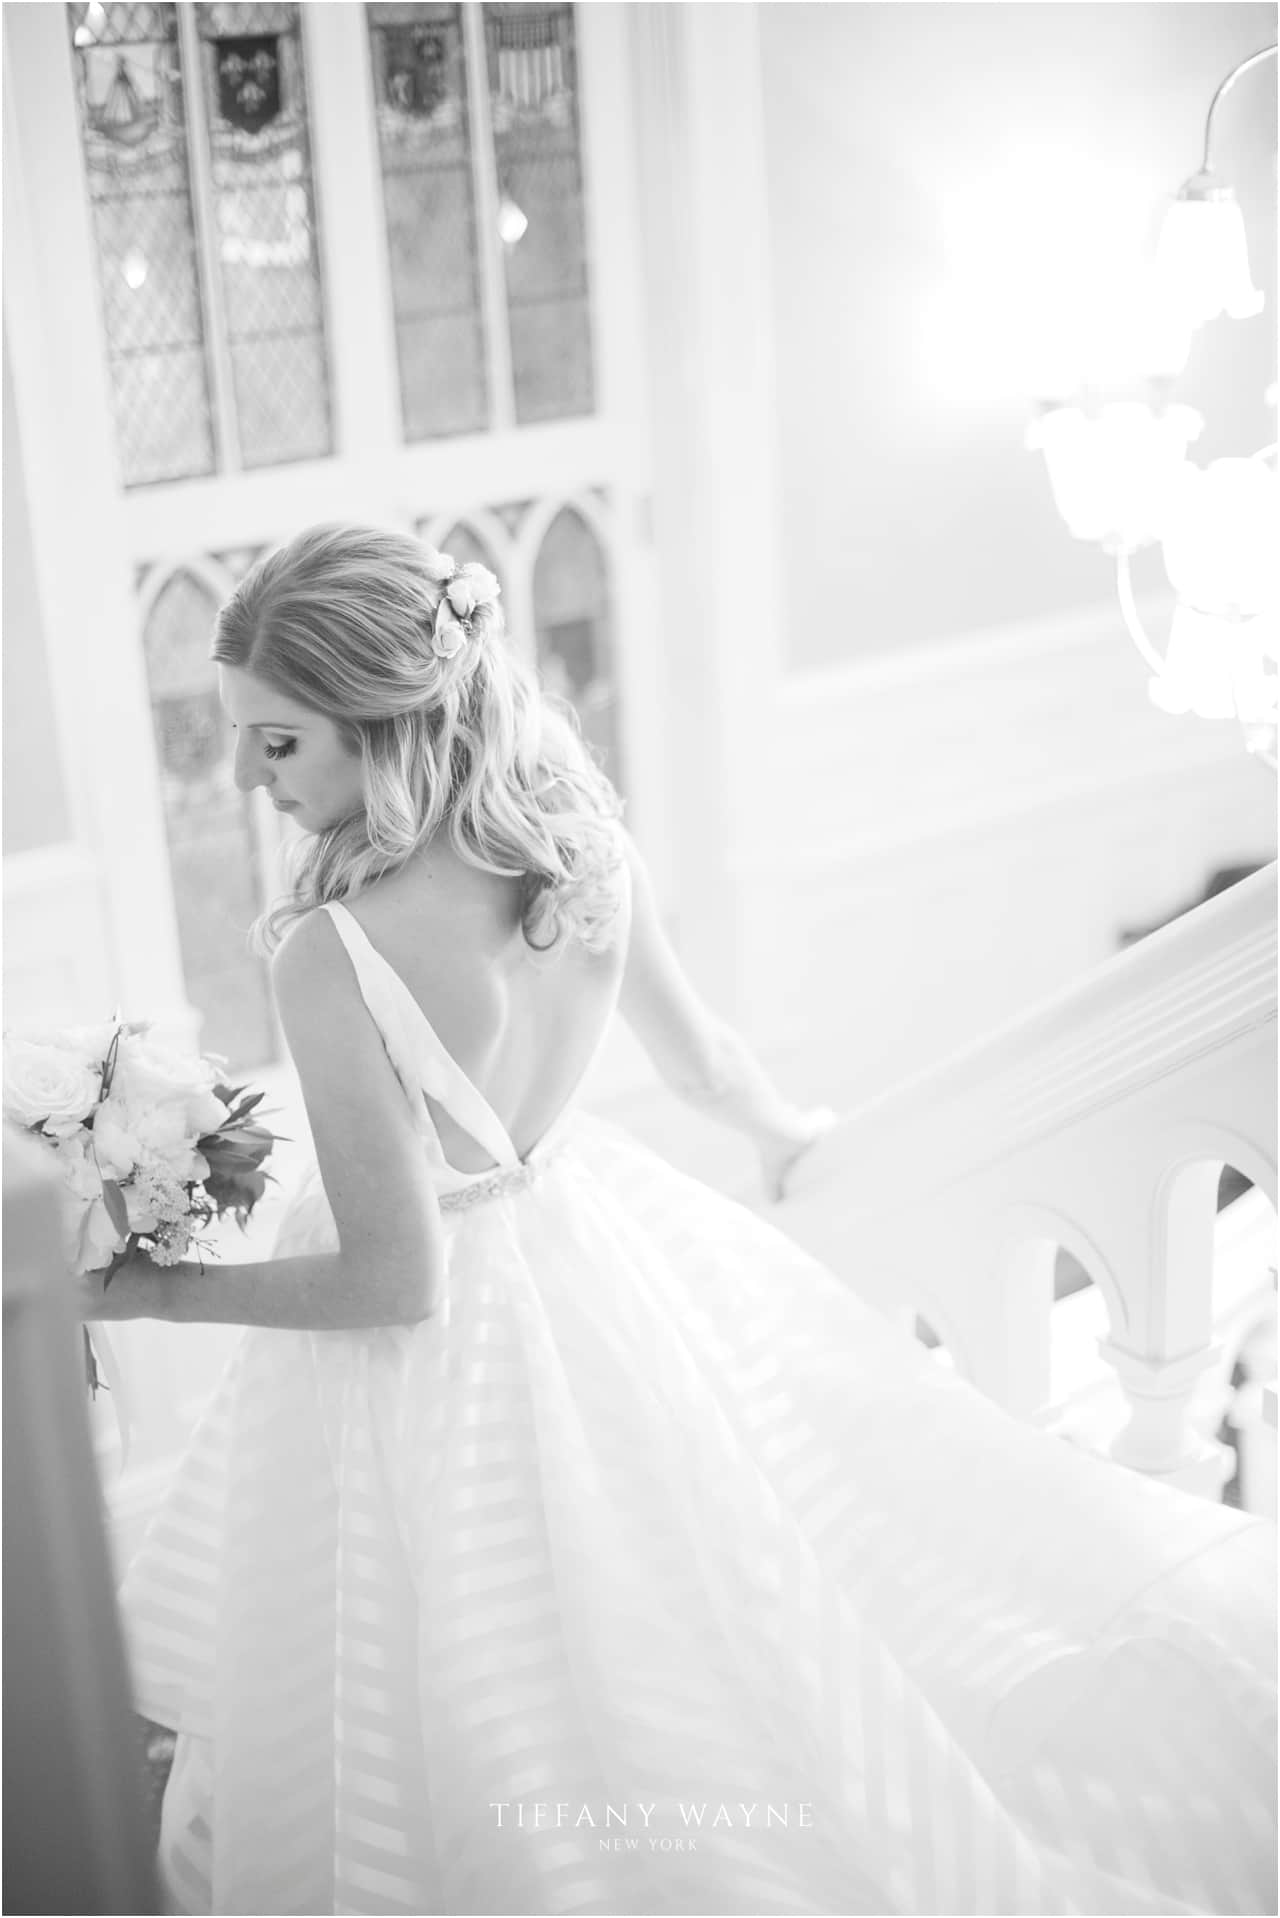 Classic bridal portrait at Inn at the Erlowest